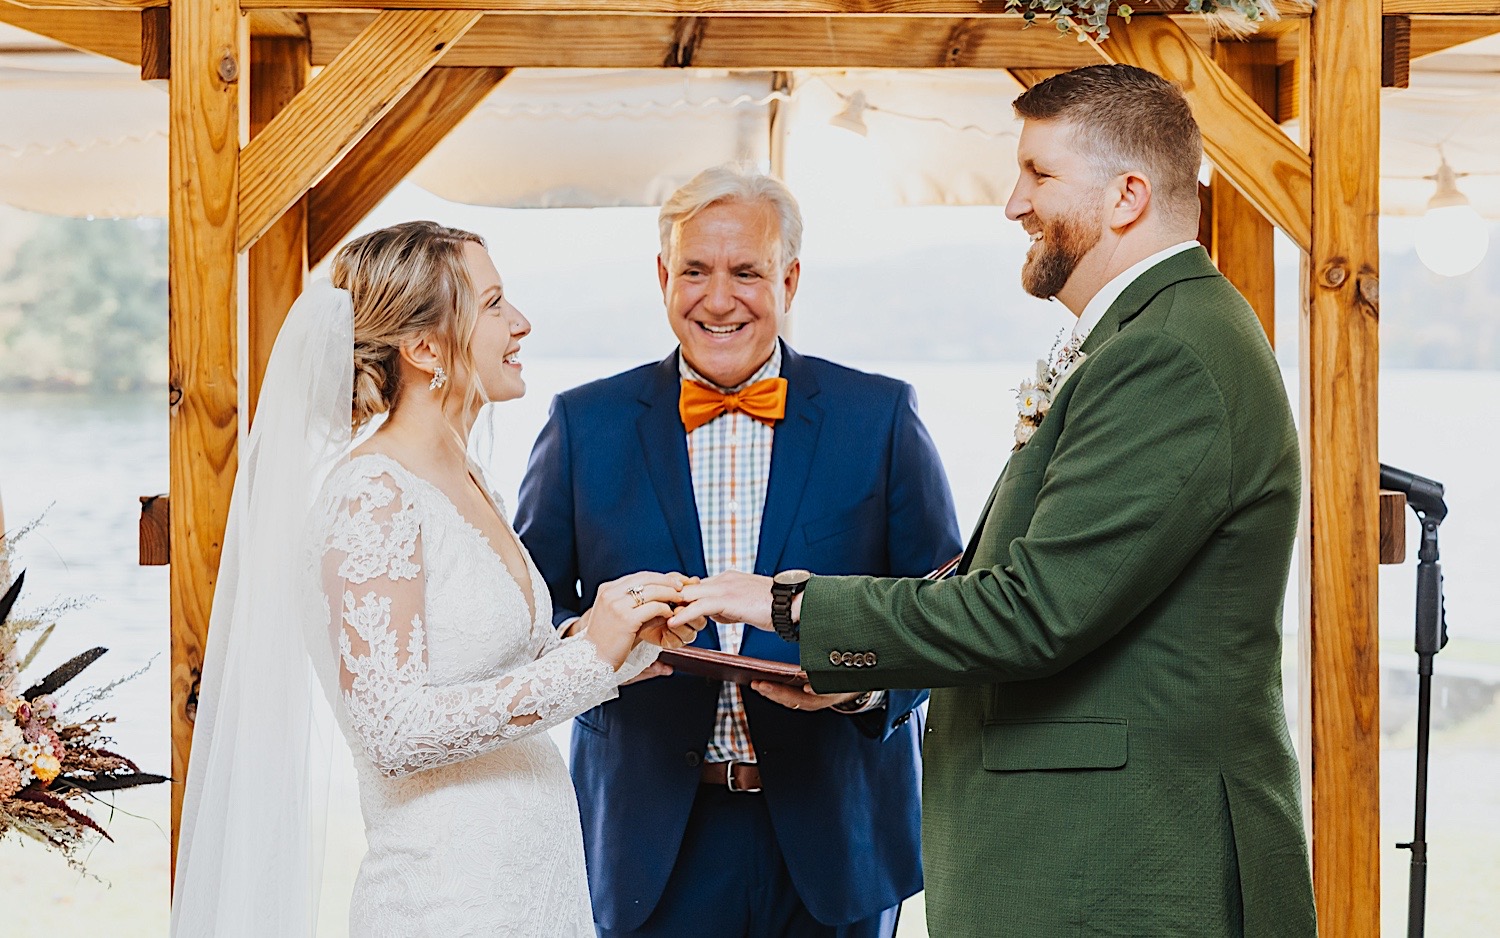 A bride and groom smile at each other while the bride puts a wedding ring on the groom's hand during their rainy wedding ceremony at Lake Bomoseen Lodge in Vermont